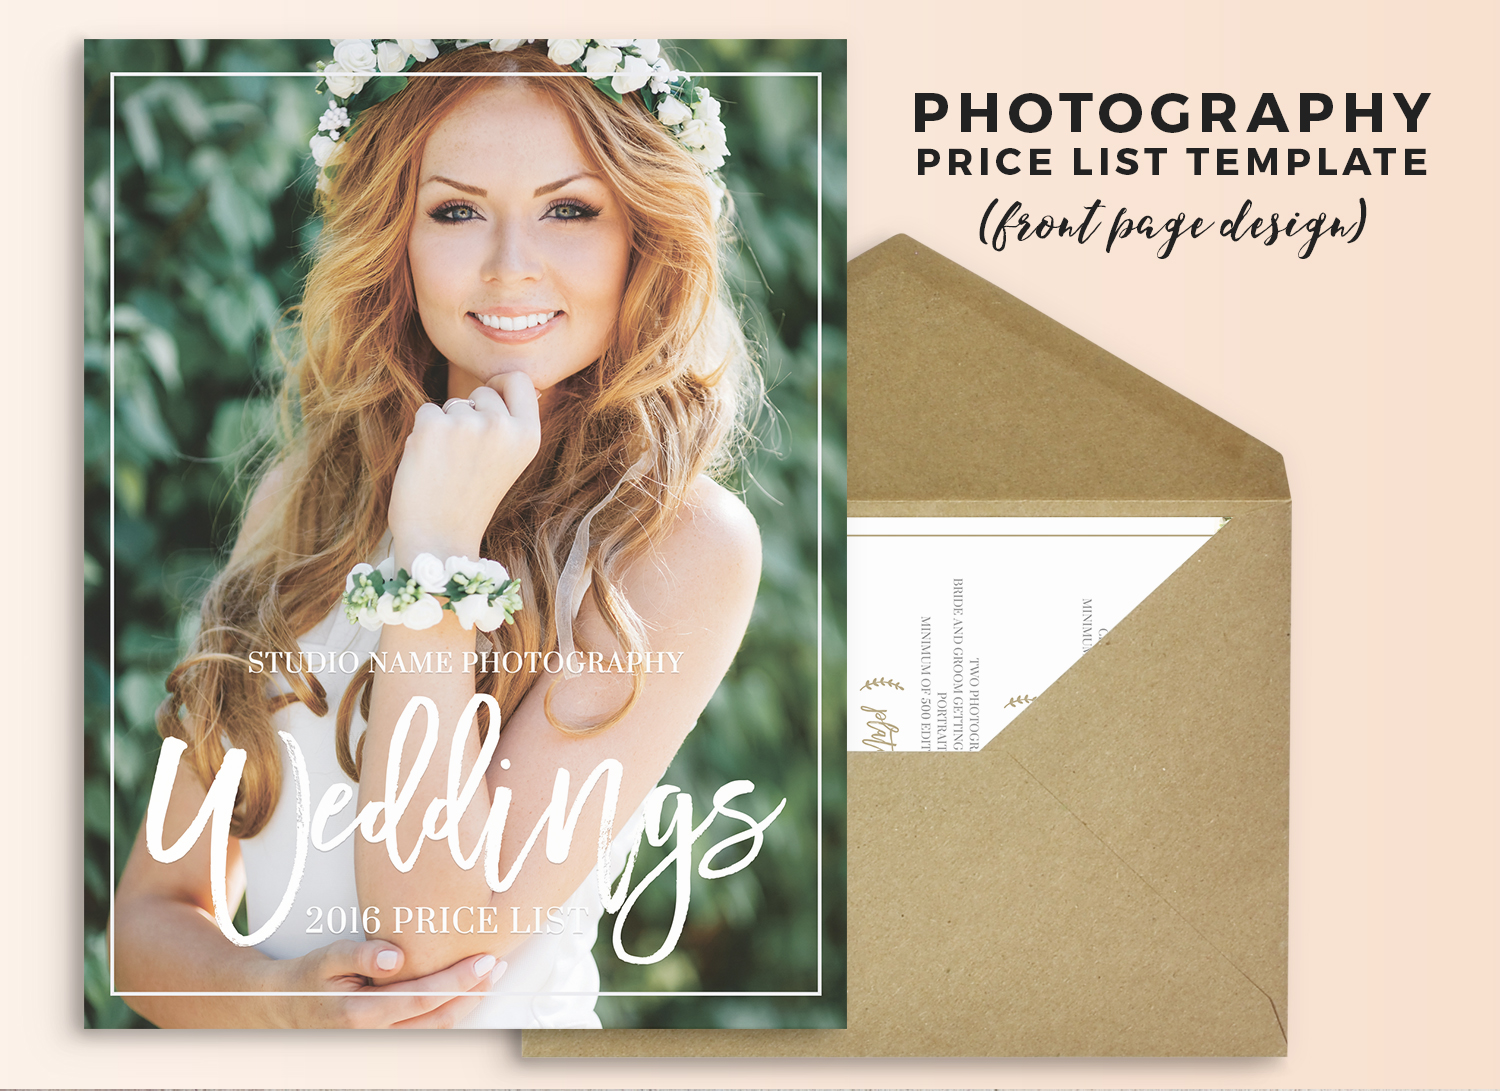 Photoshop Marketing Template - Pricing Guide